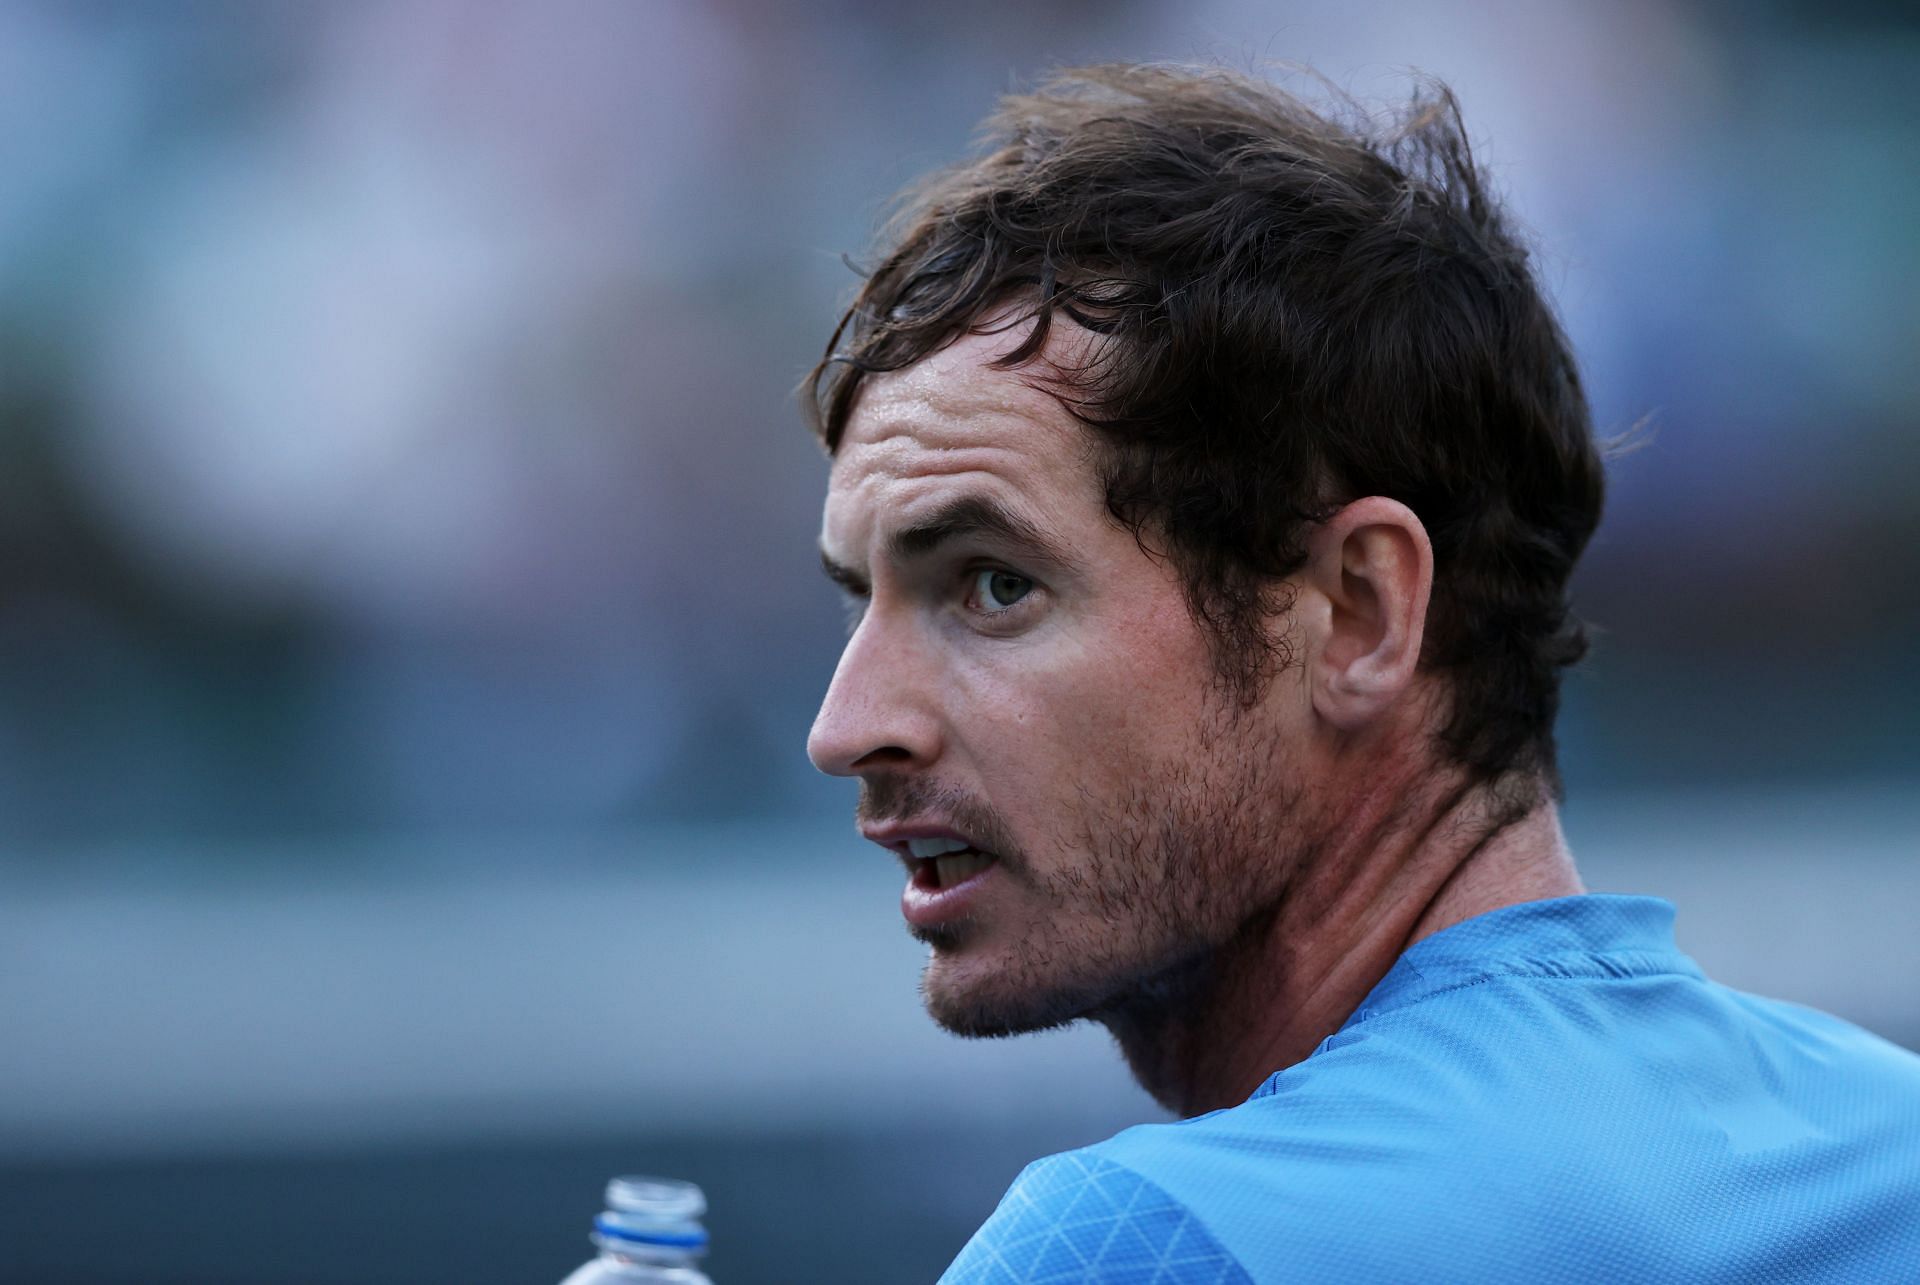 Andy Murray took out Jannik Sinner in his last match.